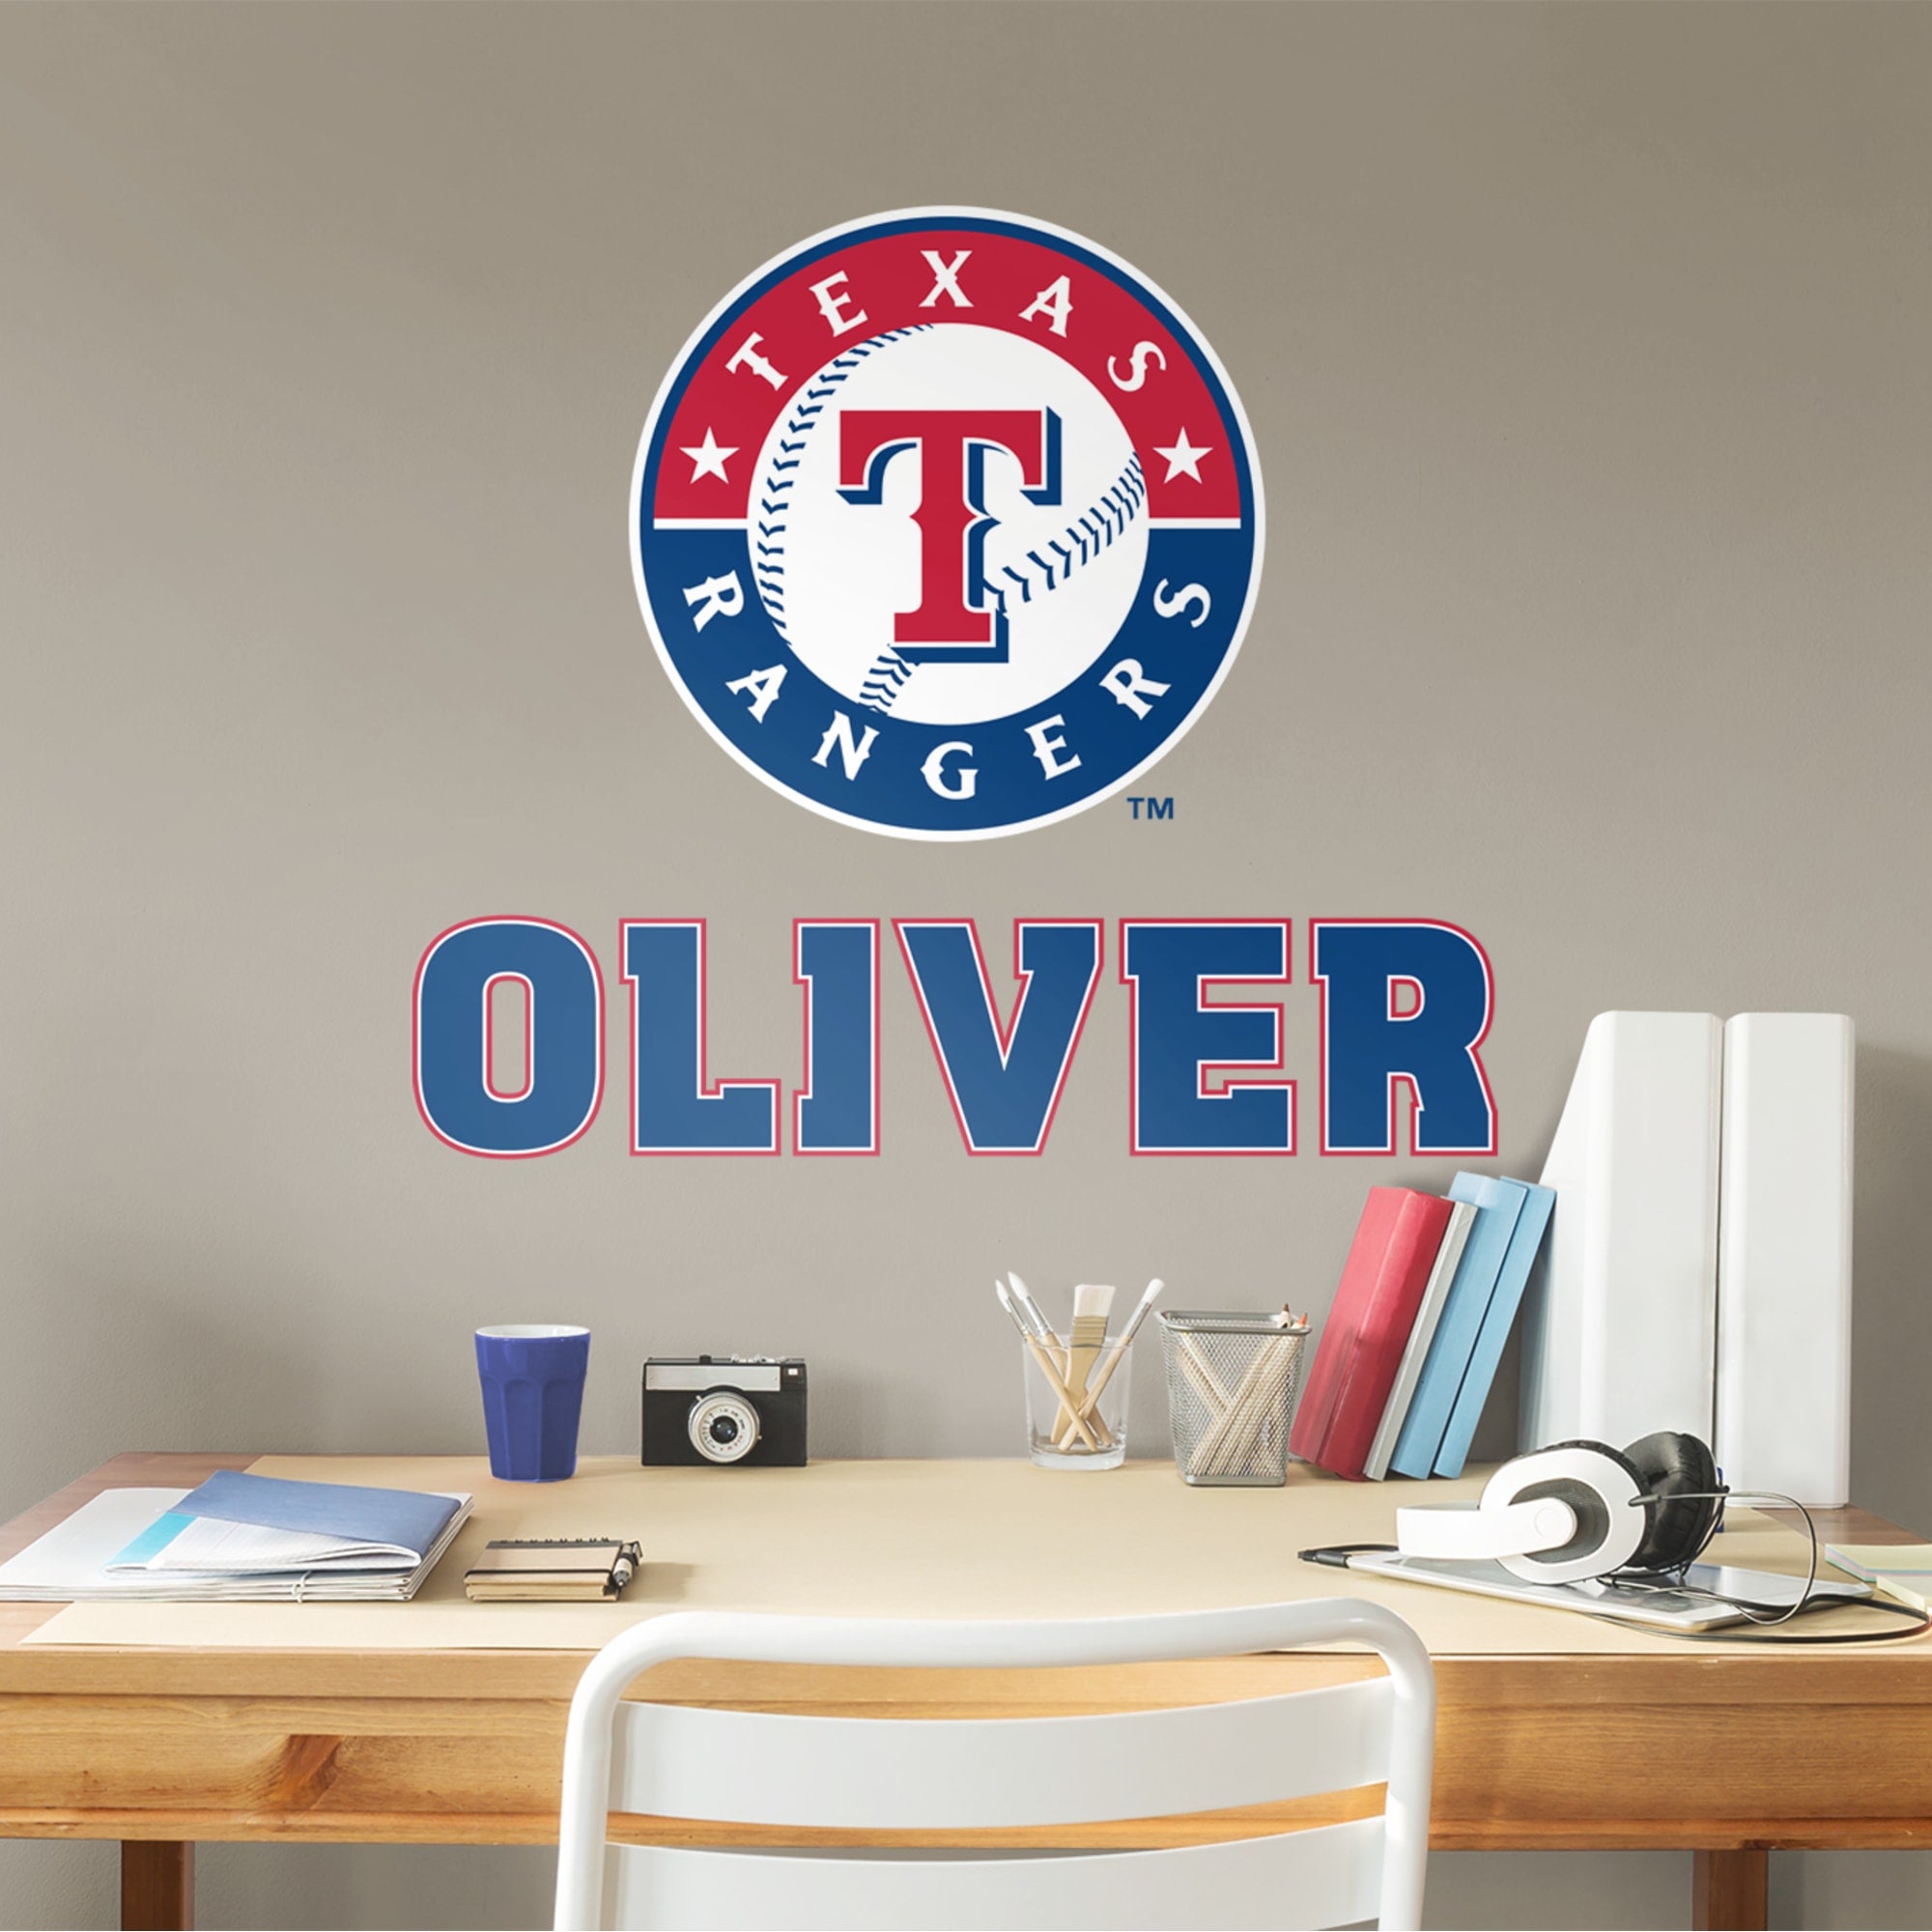 Texas Rangers: Stacked Personalized Name - Officially Licensed MLB Transfer Decal in Blue (52"W x 39.5"H) by Fathead | Vinyl